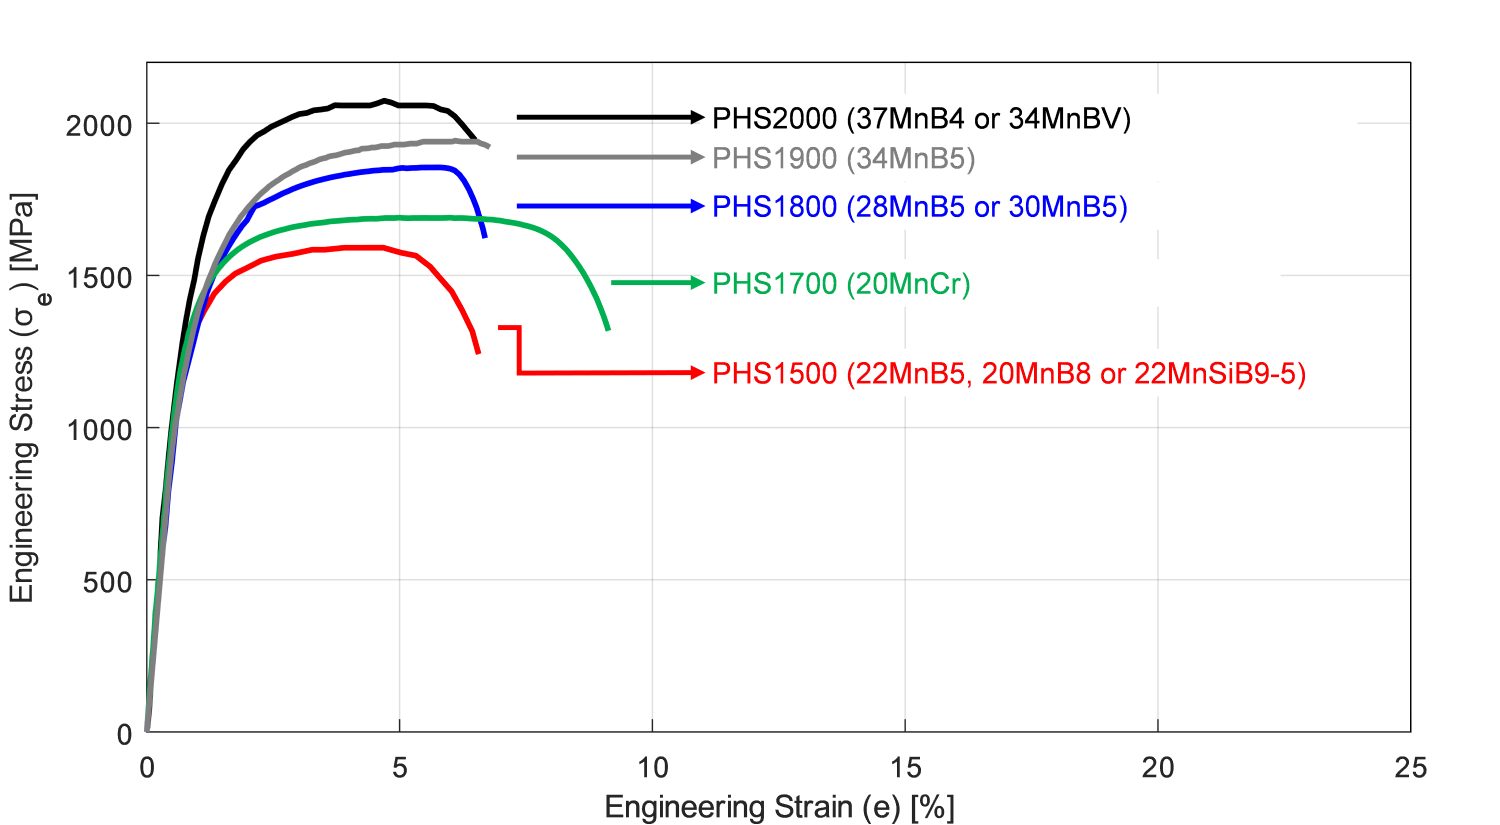 Figure 1: PHS grades over 1500 MPa tensile strength, compared with the common PHS1500 (re-created after Citations B-18, W-28, Z-7, L-30, L-28, B-14).